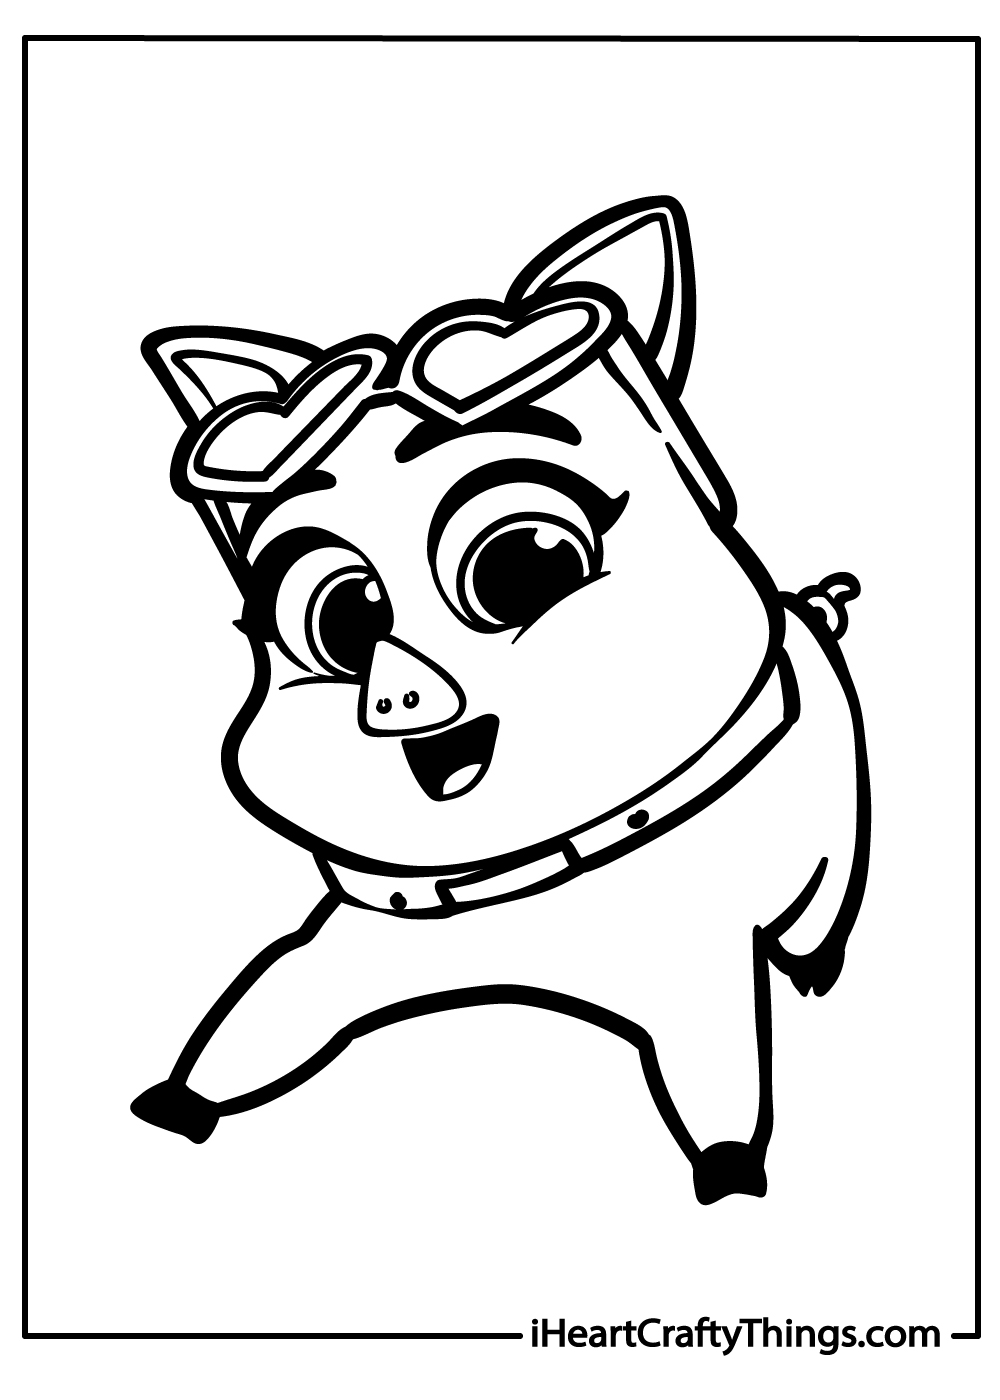 Puppy Dog Pals Coloring Pages for adults